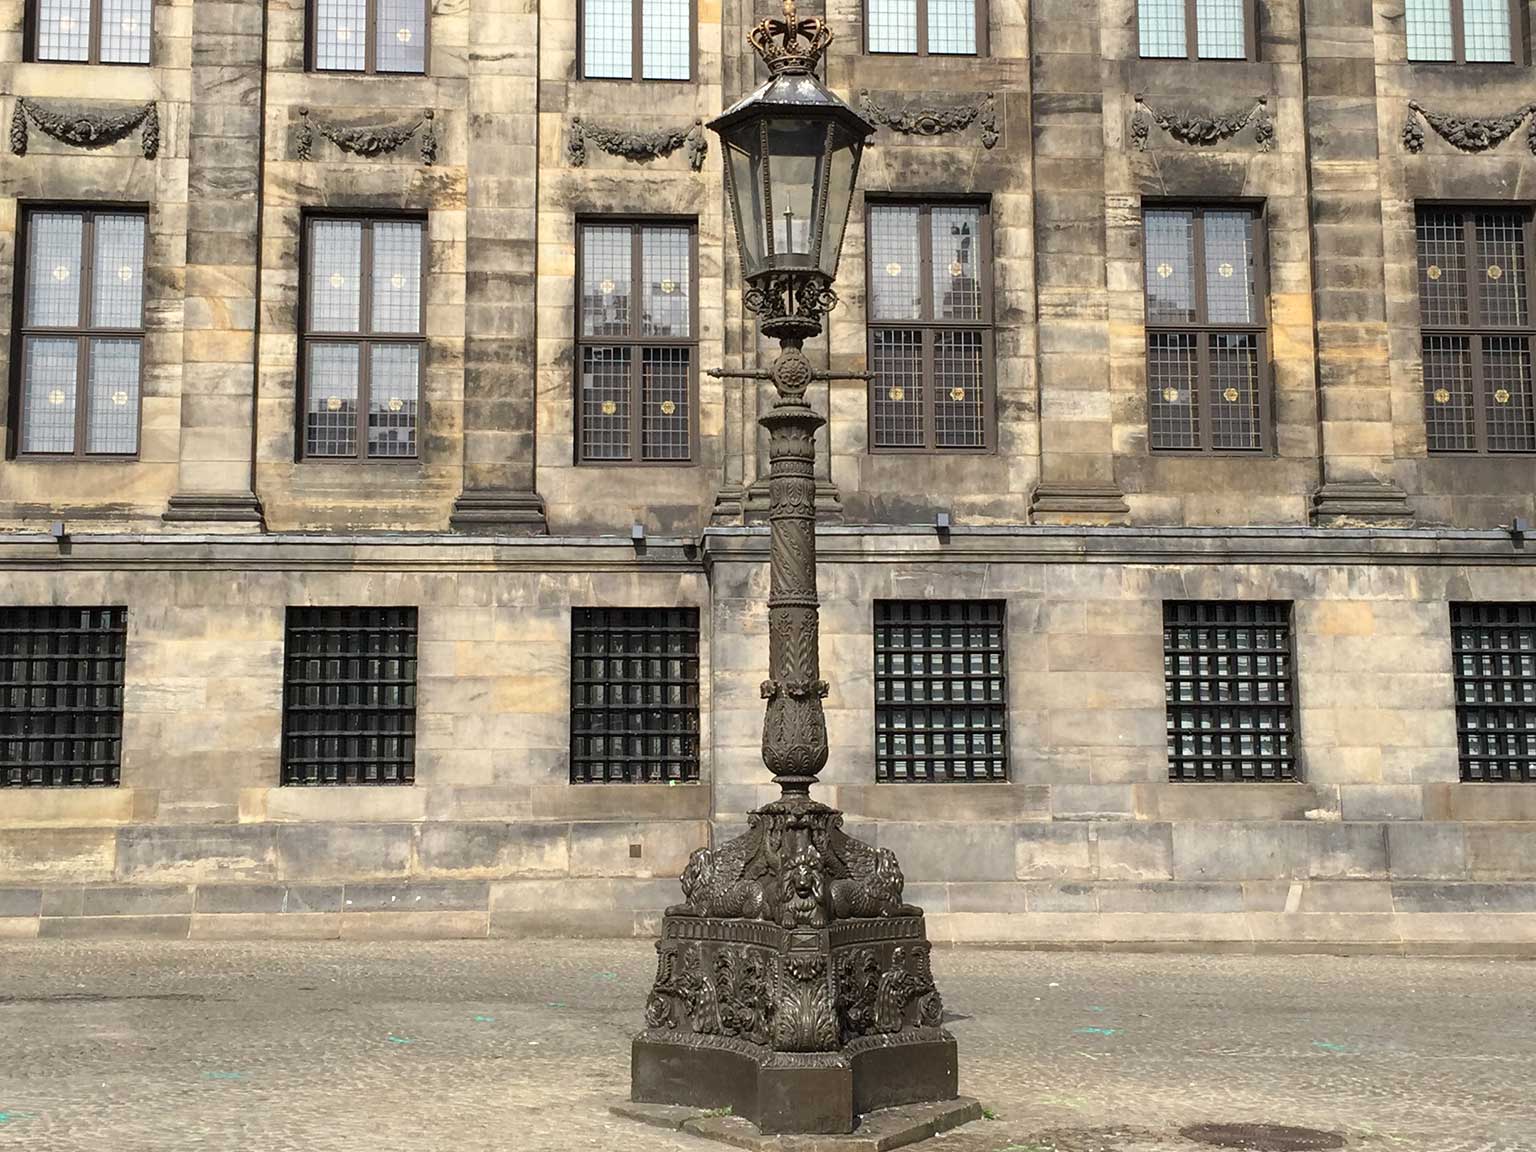 Lamp posts from 1844 in front of the palace, Dam, Amsterdam